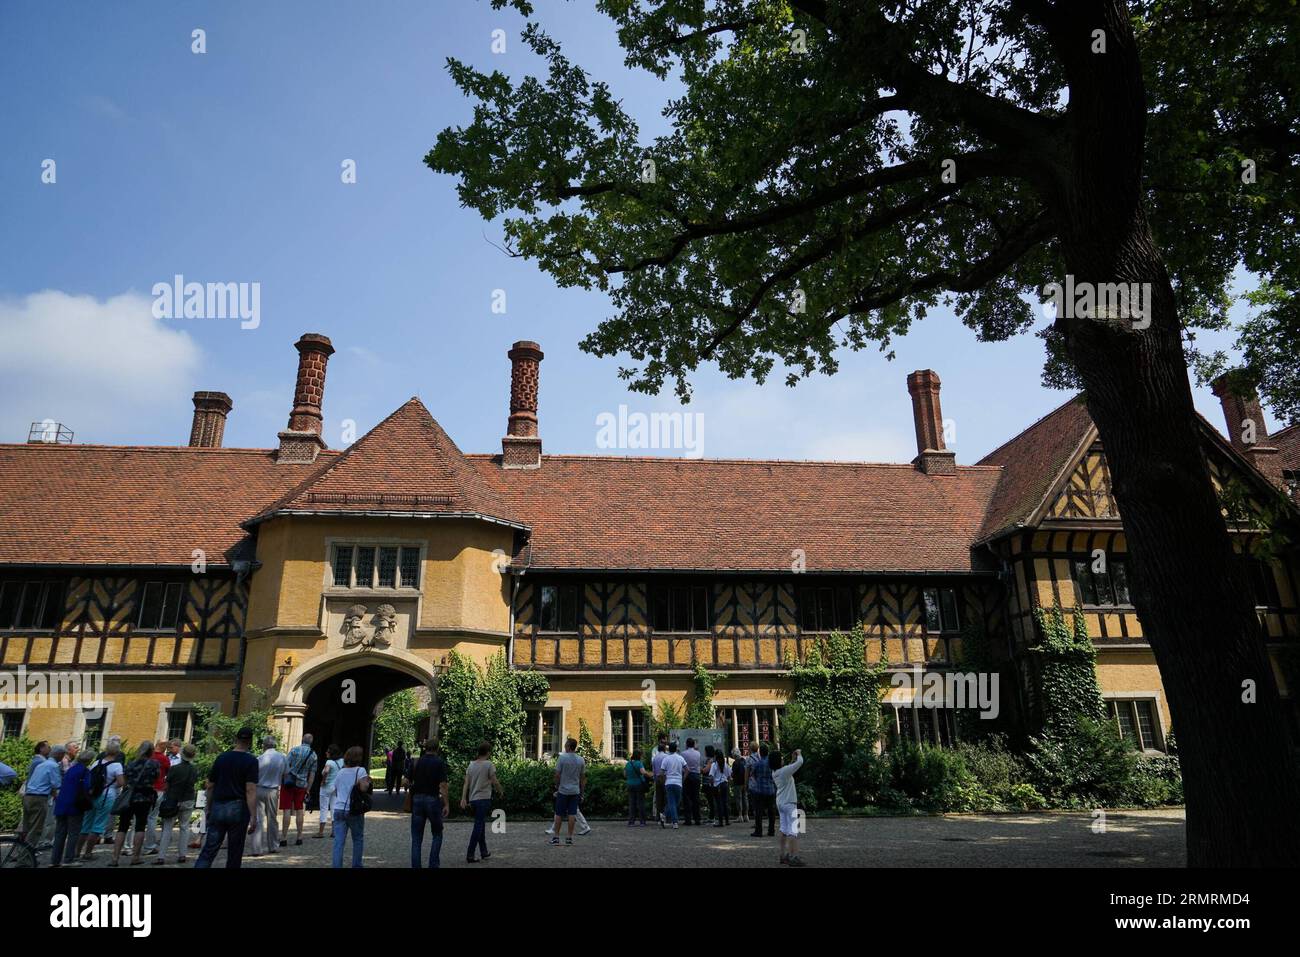 (140726) -- POTSDAM, July 26, 2014 (Xinhua) -- People visit the Cecilienhof Palace in Potsdam, capital of Germany s Brandenburg state, where the Potsdam Proclamation was issued in 1945, July 26, 2014. Saturday marks the 69th anniversary of the July 26, 1945 Potsdam Proclamation demanding Japan s unconditional surrender to the Allies at the end of World War II, in the wake of its wartime aggression. (Xinhua/Liu Yinan) GERMANY-POTSDAM-POTSDAM PROCLAMATION-ANNIVERSARY PUBLICATIONxNOTxINxCHN   Potsdam July 26 2014 XINHUA Celebrities Visit The Cecilienhof Palace in Potsdam Capital of Germany S Bran Stock Photo